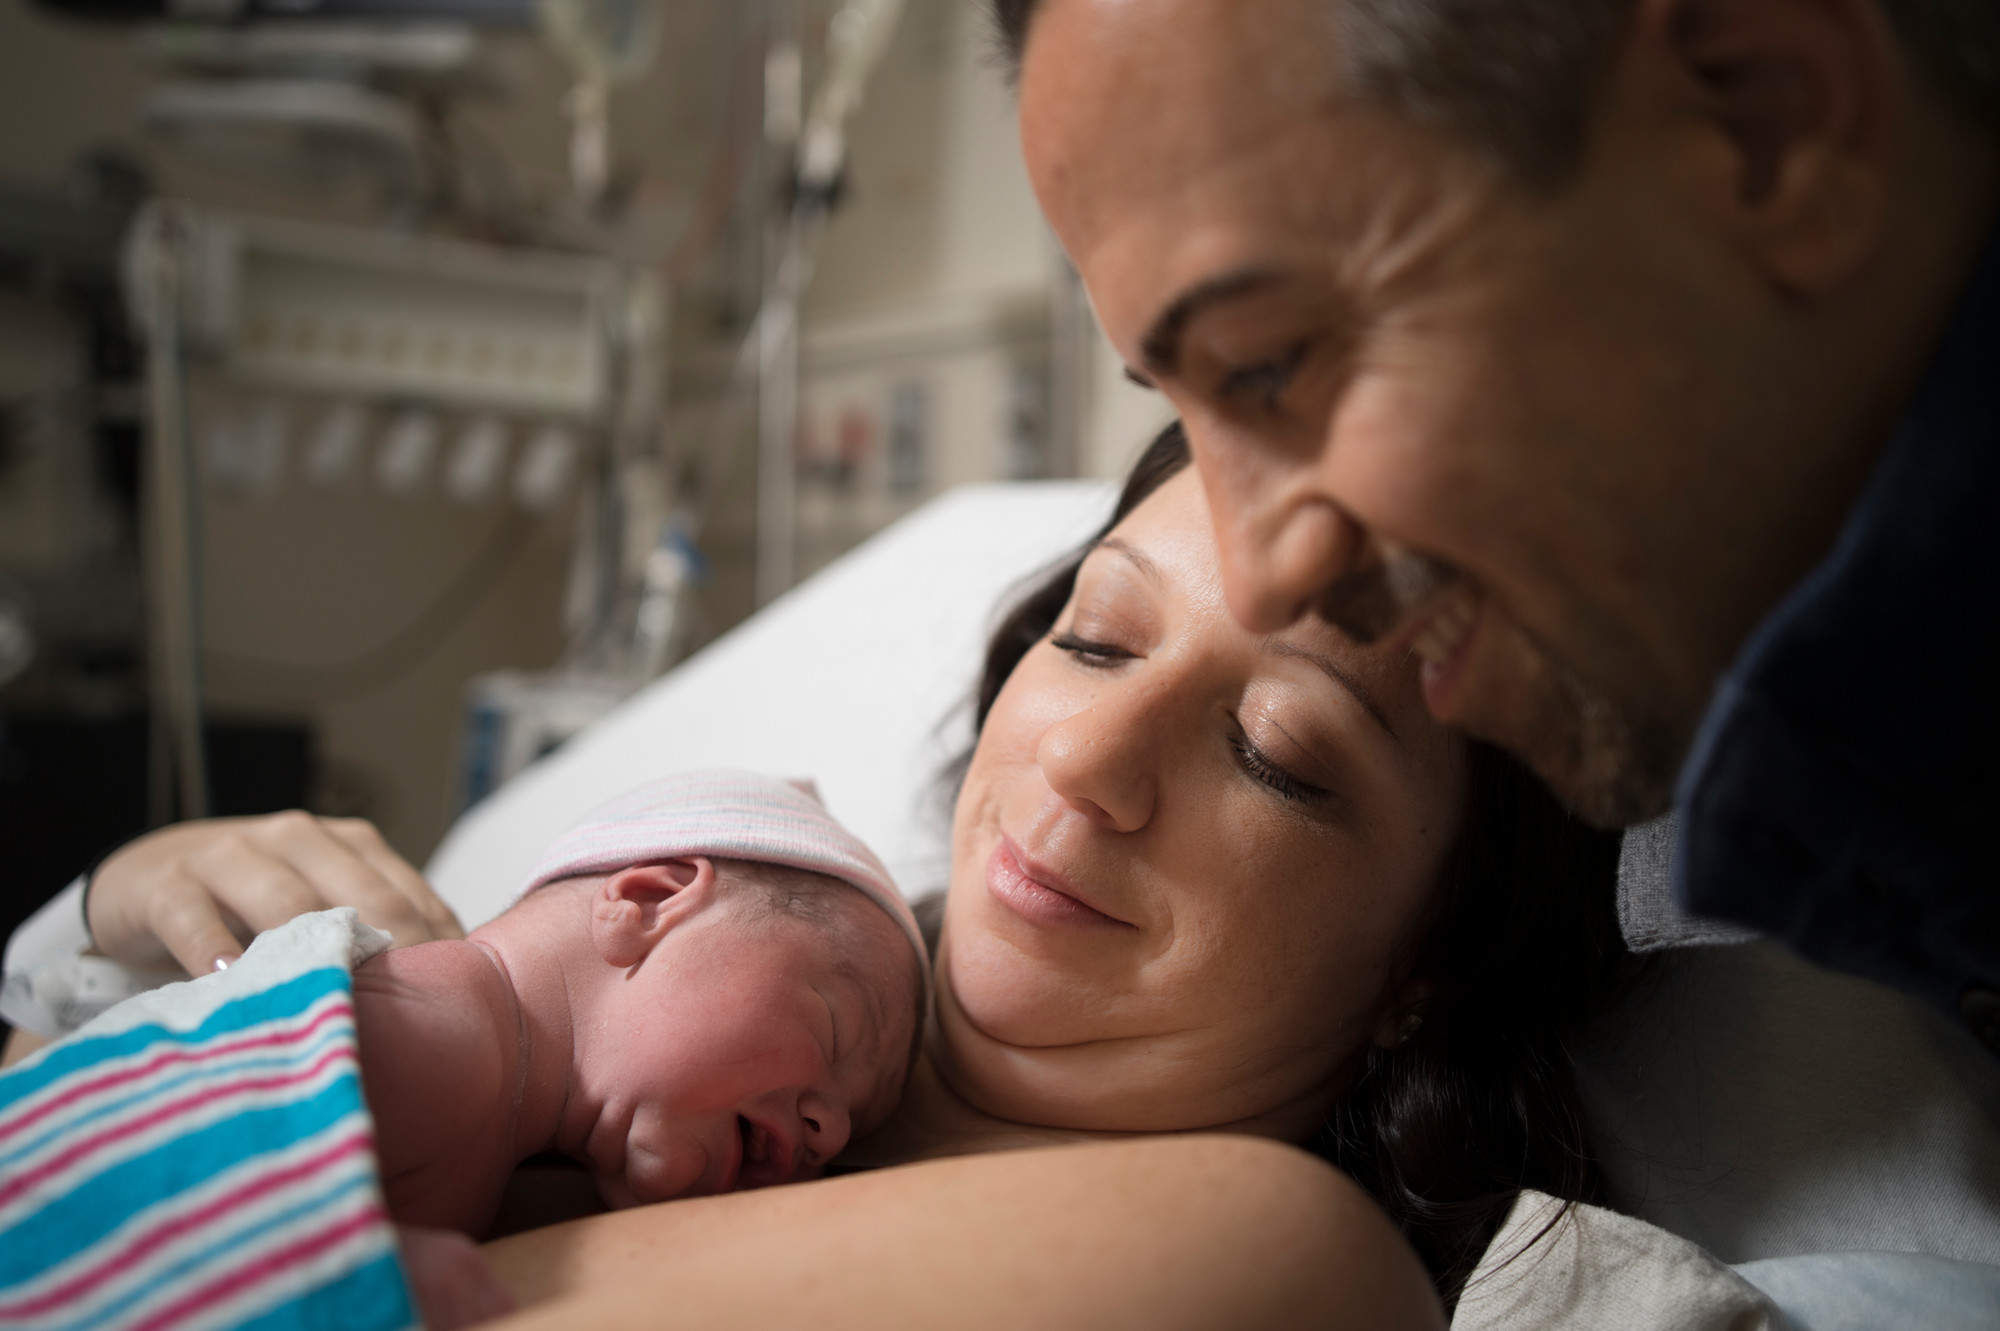 Joseph and Vanessa Sparacio welcomed their second child, Austin Joseph, to the world 31 seconds after midnight on Jan. 1.